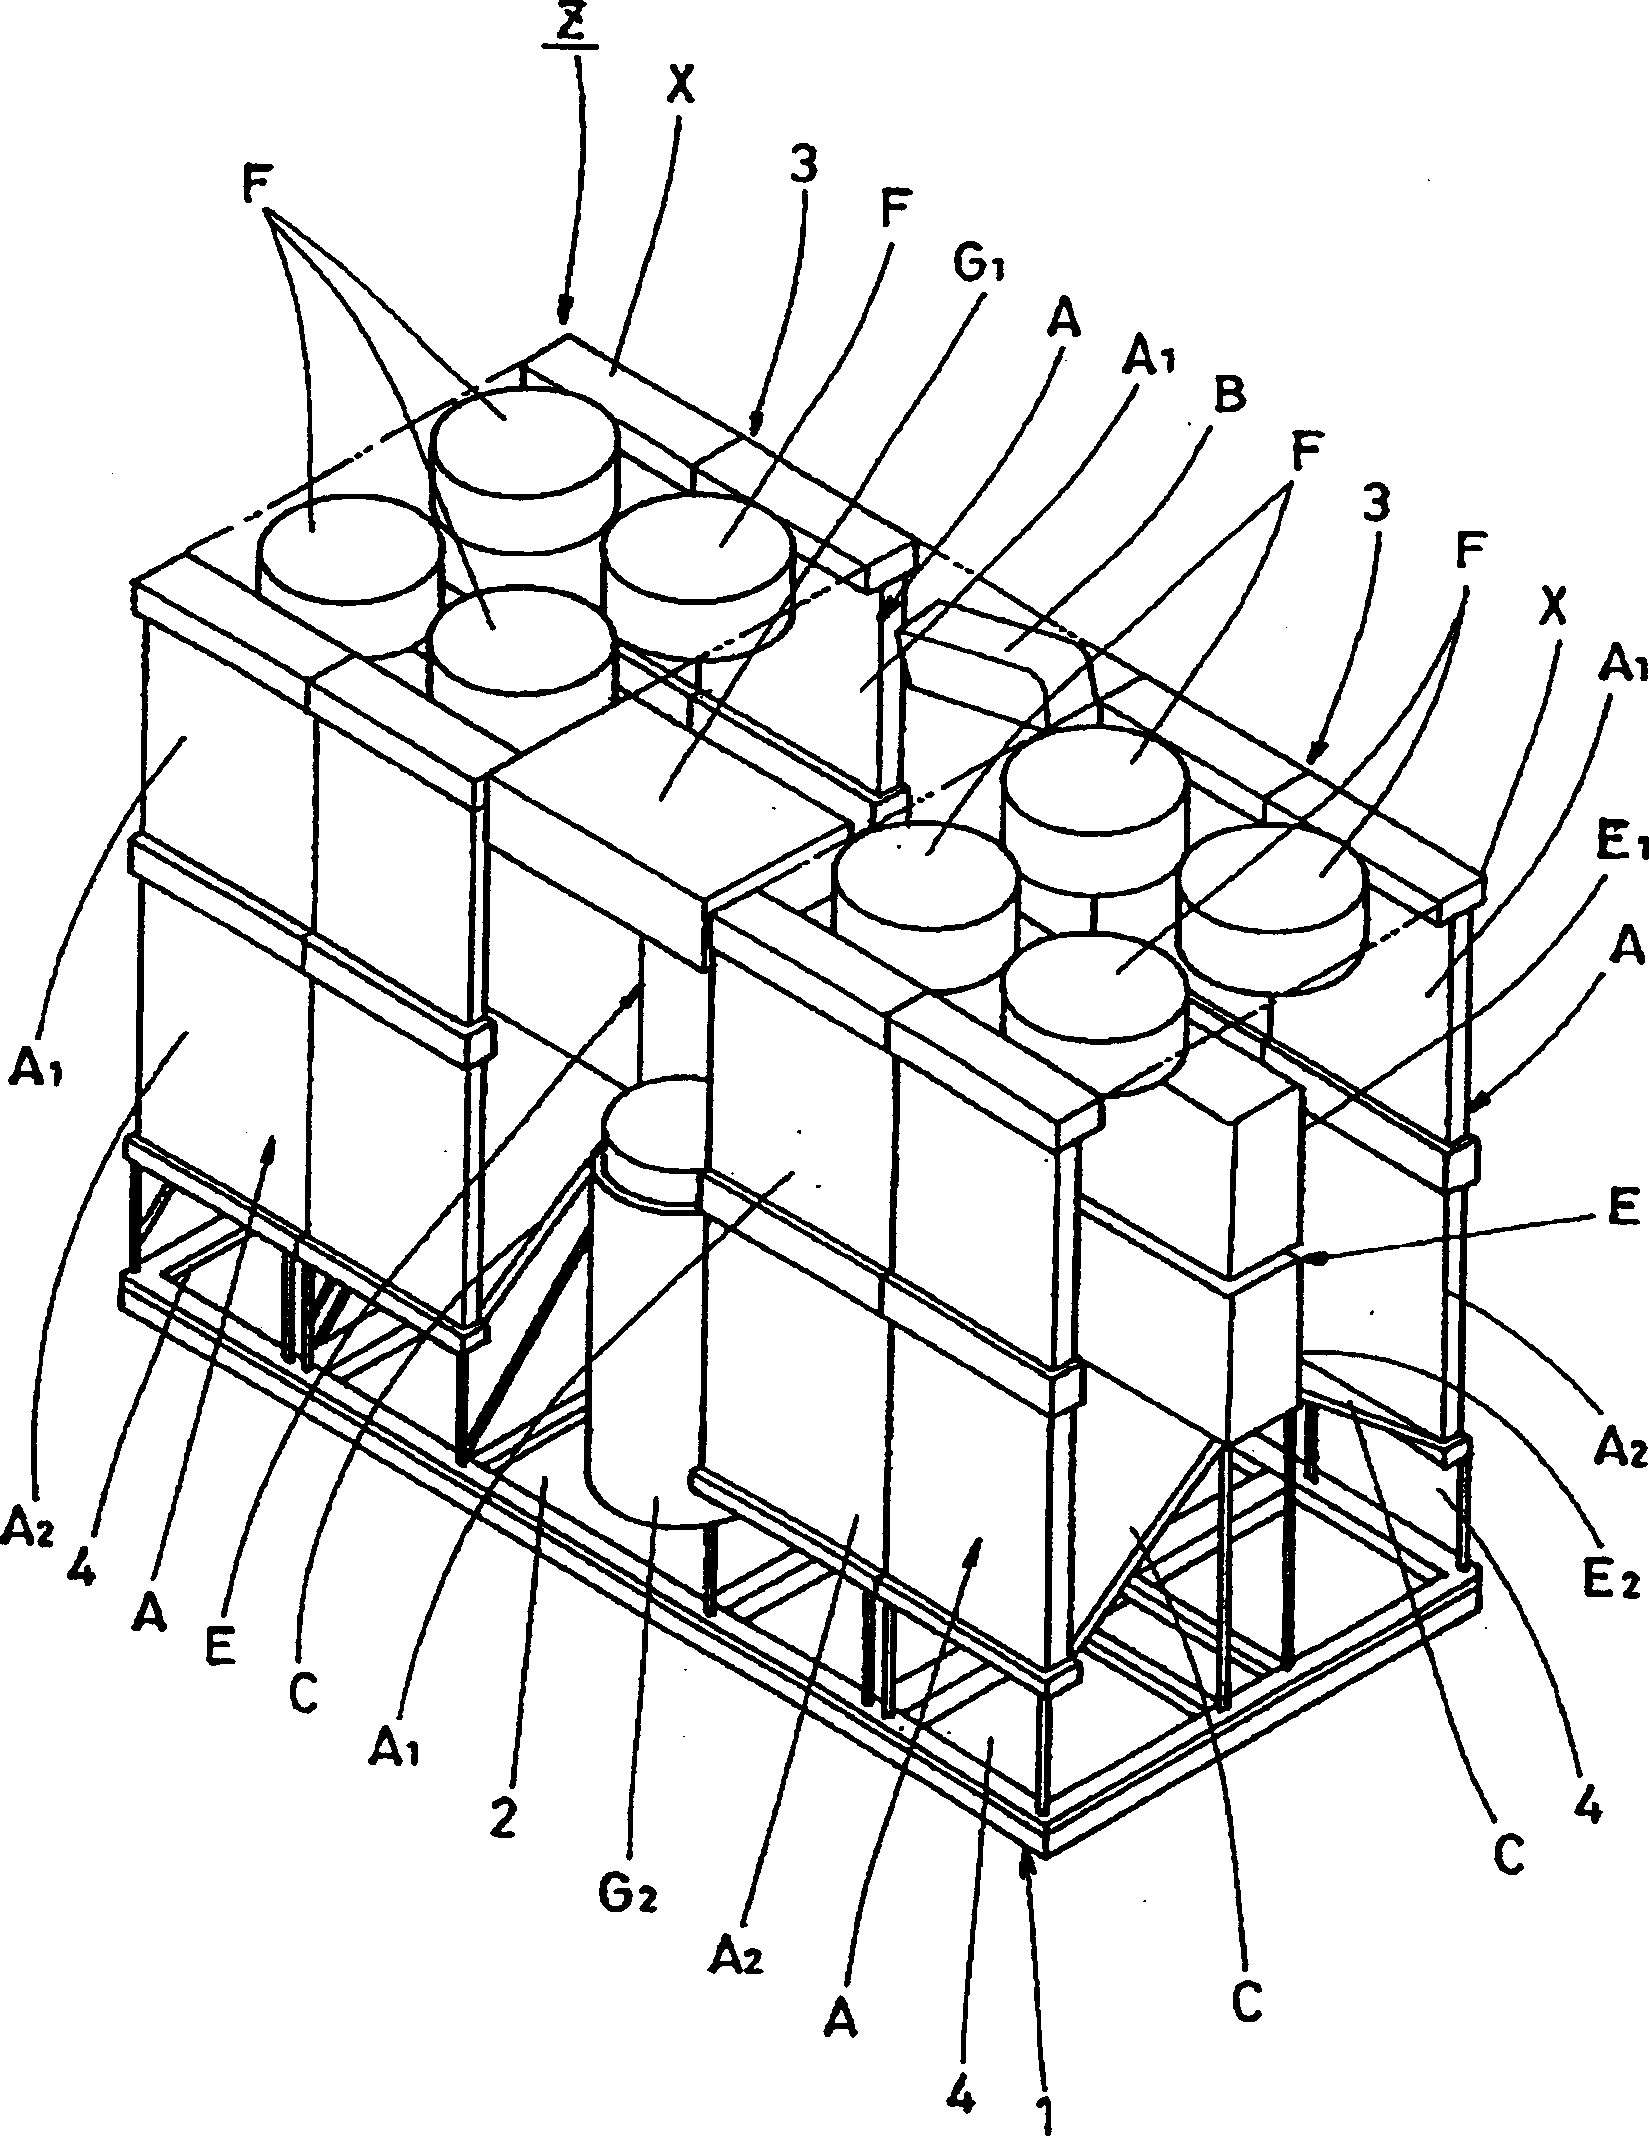 Air-cooled absorption type refrigerating plant